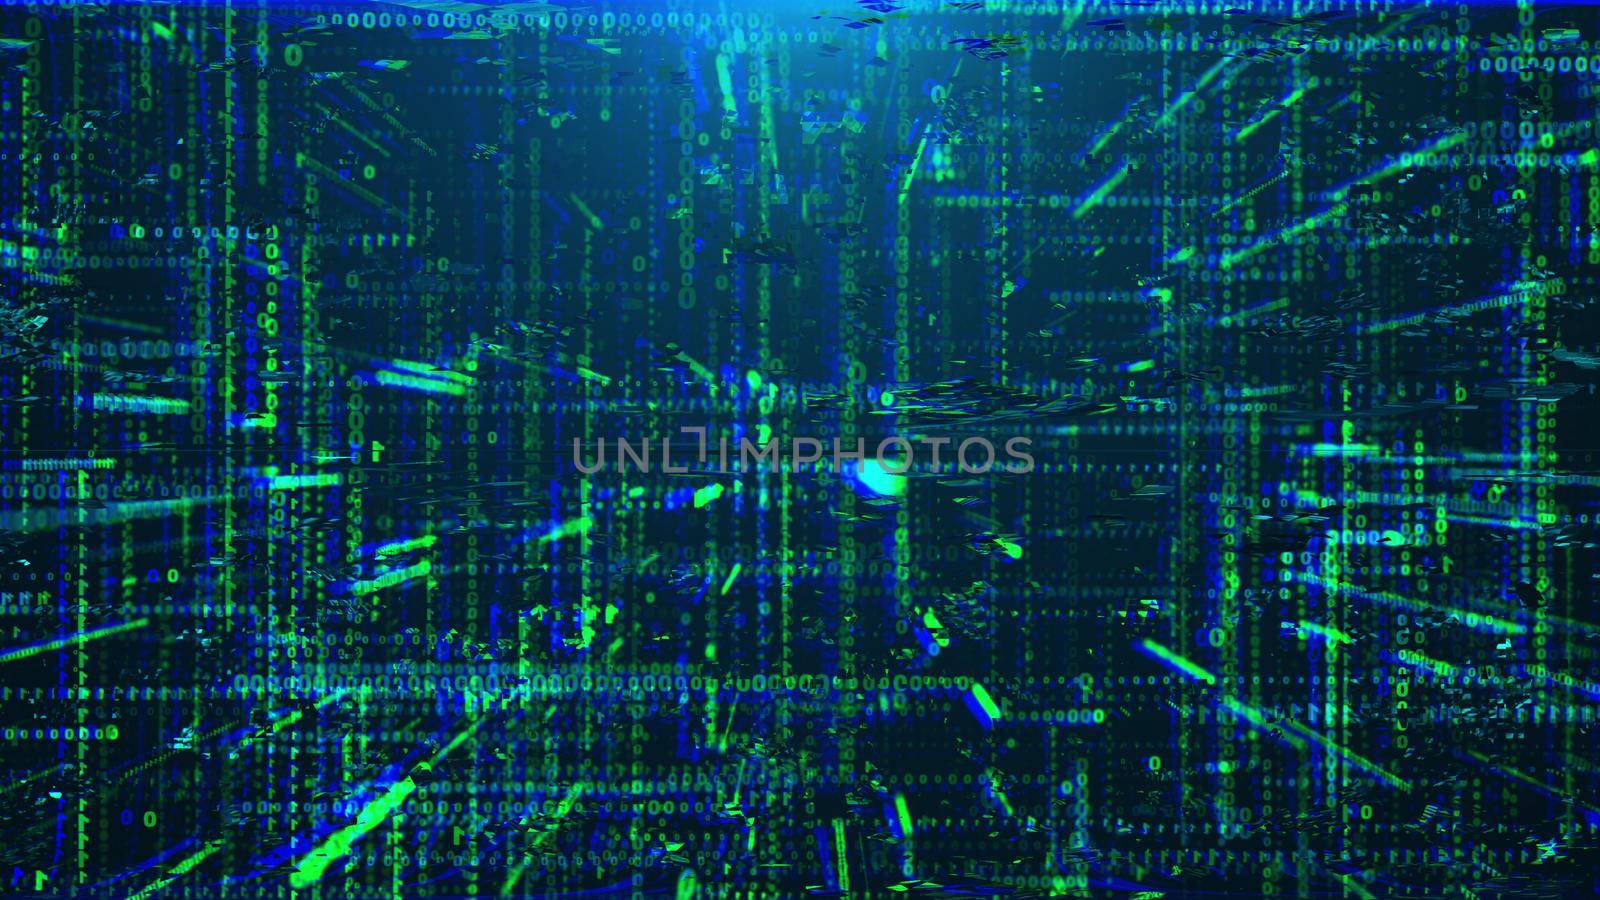 Transmission corruption 3d data render in cyber structure of matrix information. Static failure with decaying web computer decor effects. Hacker intervention in system.